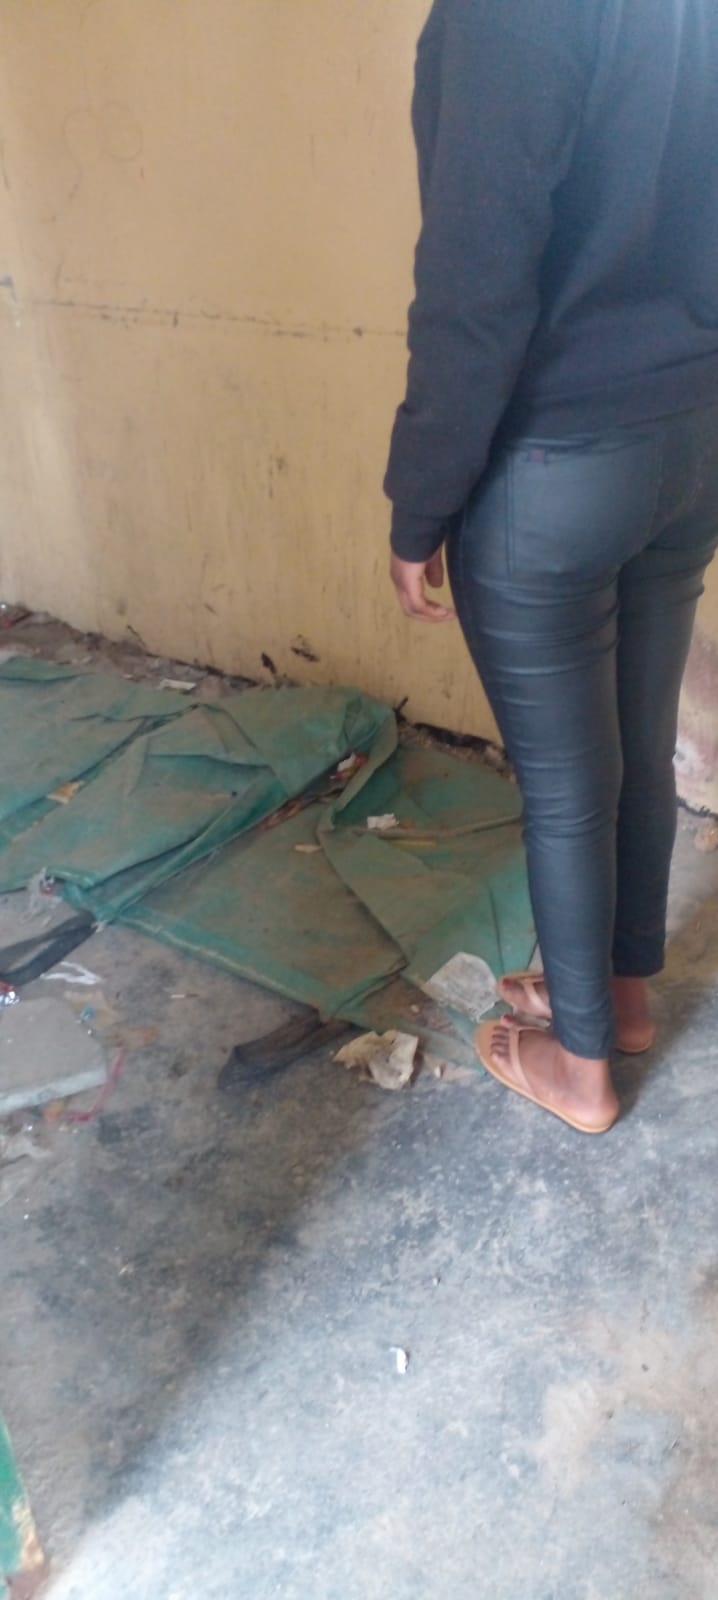 A teenager is still traumatised after what happened to her. Photo by Lulekwa Mbadamane